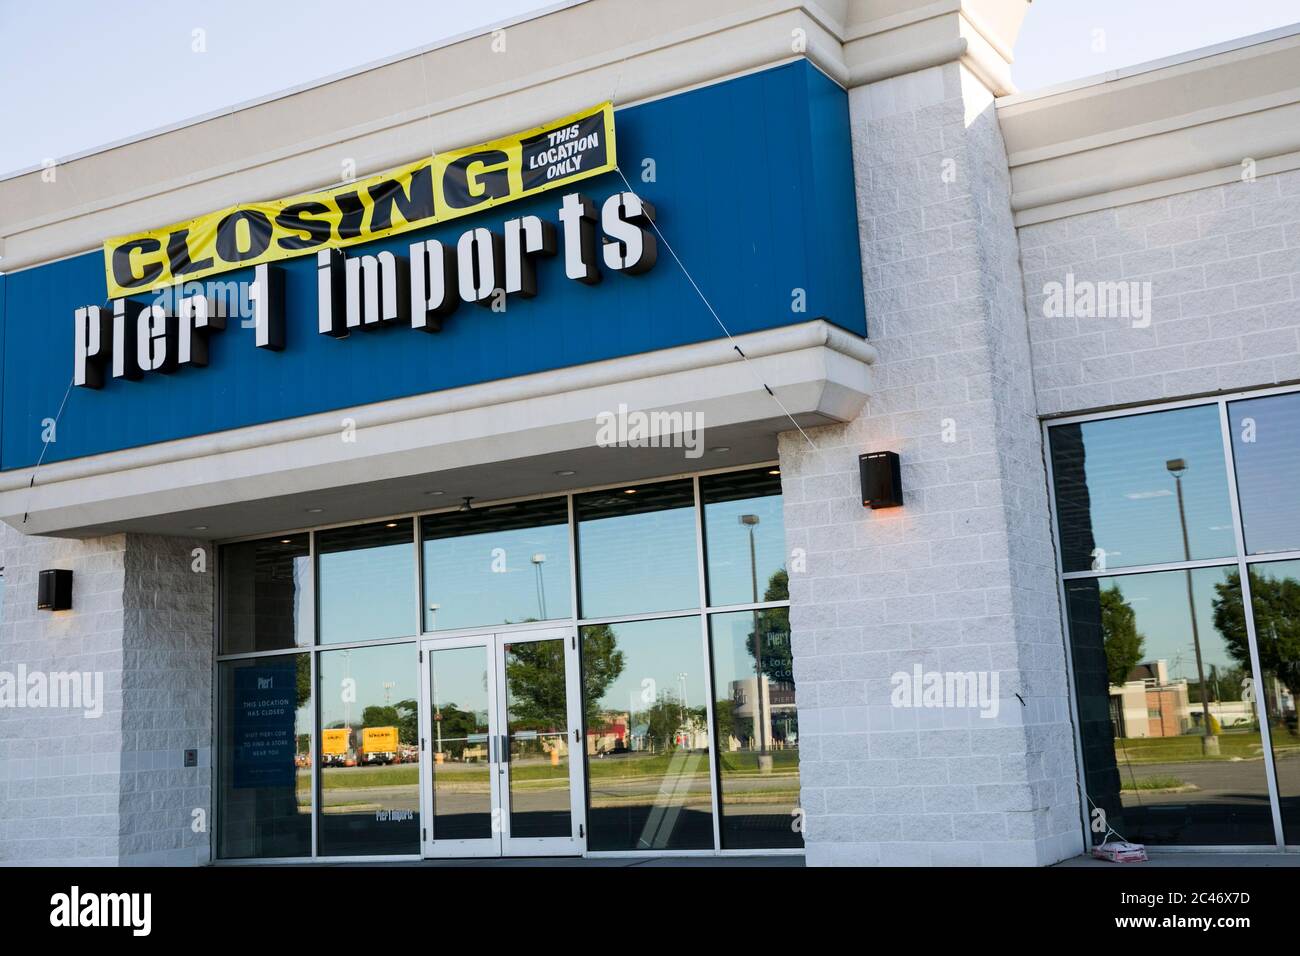 'Store Closing' signage outside of a Pier 1 Imports retail store location in Hanover, Pennsylvania on June 12, 2020. Stock Photo